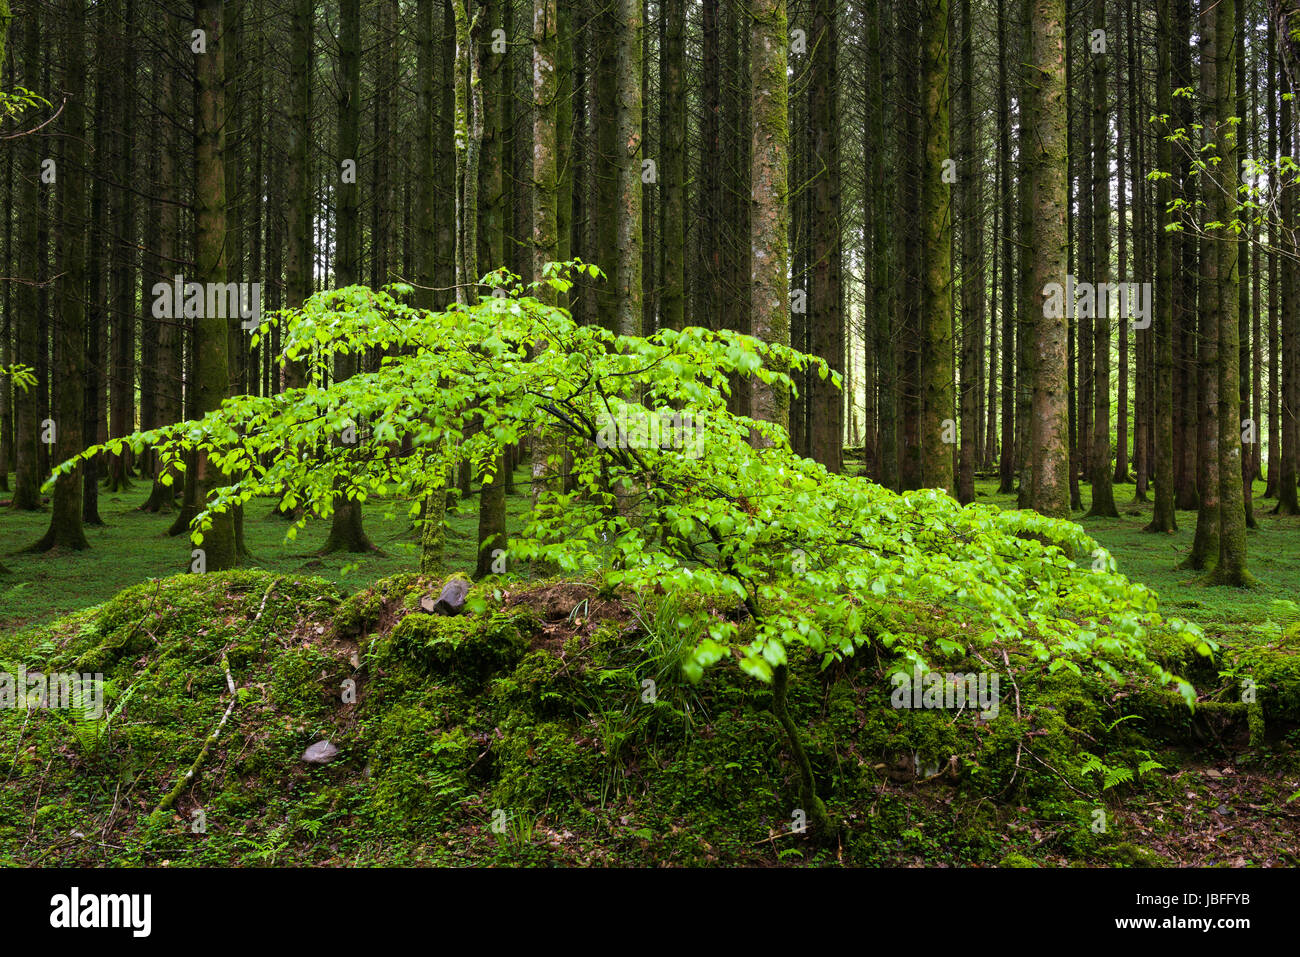 A young Beech sapling growing in a coniferous woodland in Exmoor National Park near Dulverton, Somerset, England. Stock Photo